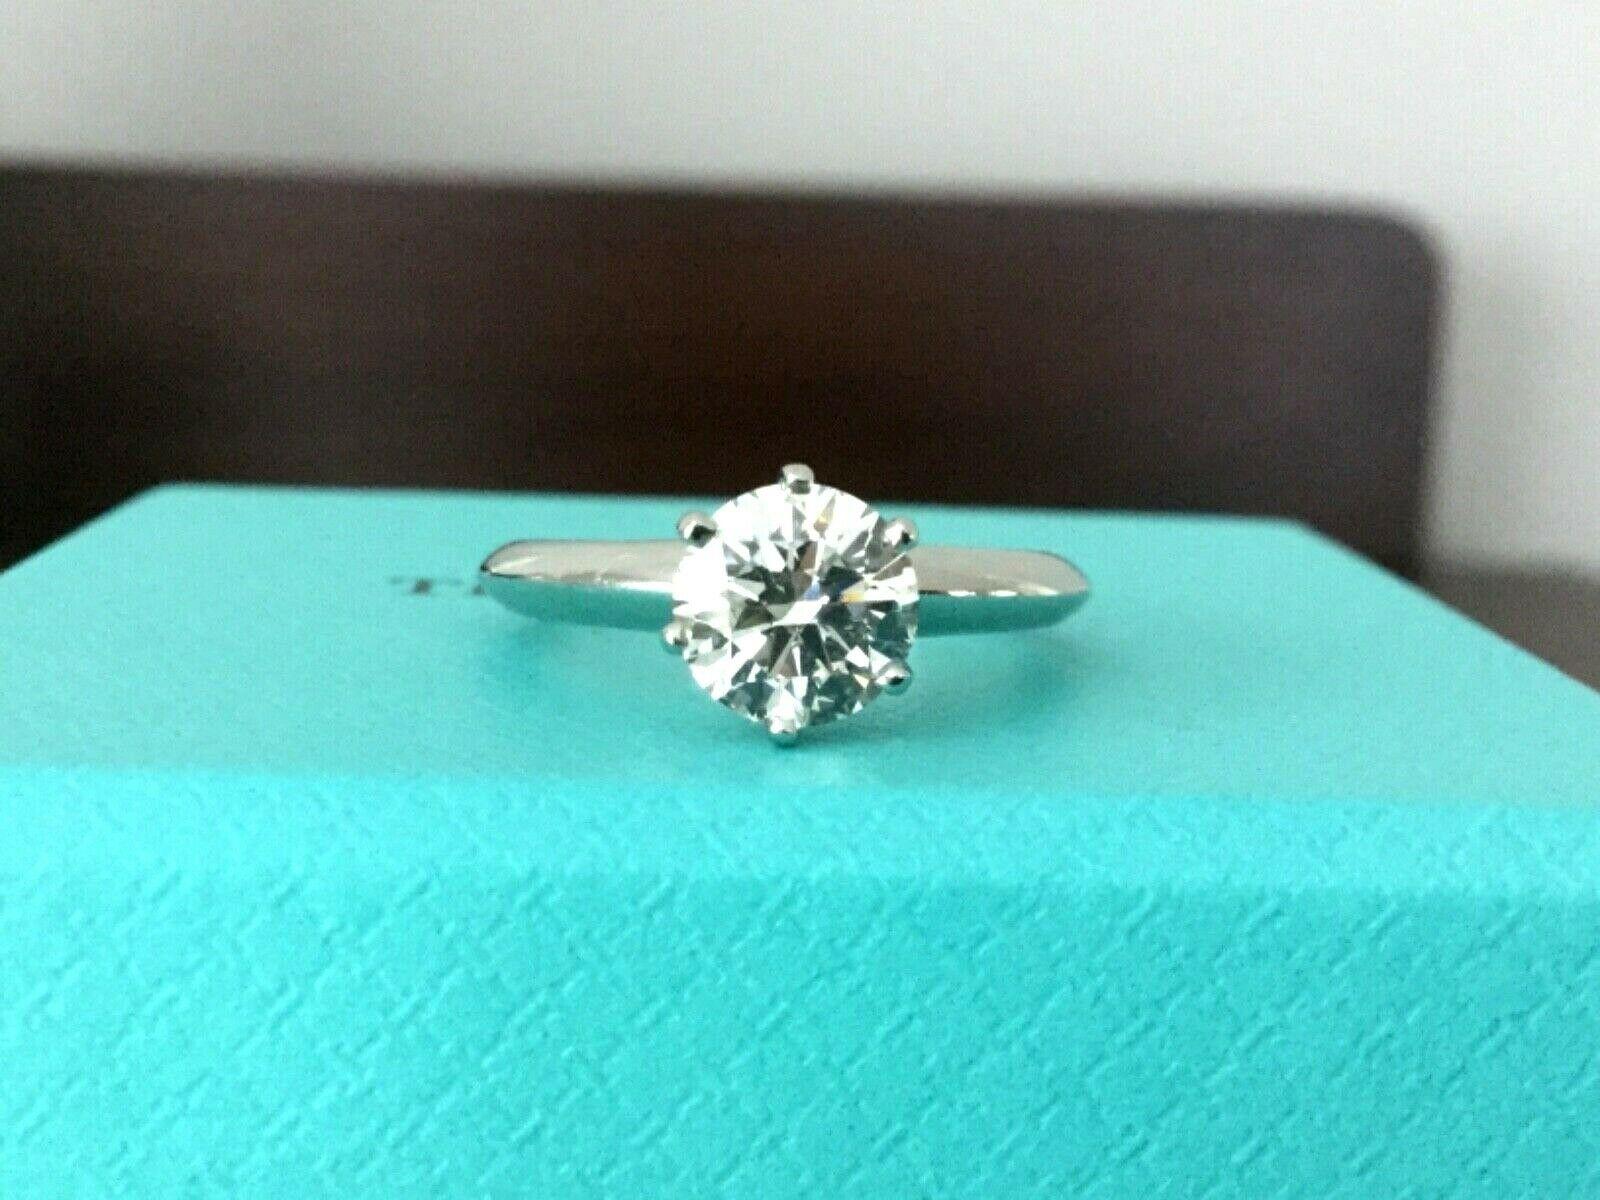 Being offered for your consideration is a like new Tiffany & Co Platinum and Diamond 1.19 carat natural round engagement ring set in the classic 6 prong setting.  

This stunning diamond looks HUGE, Super White and Super Fiery - it is a magnificent